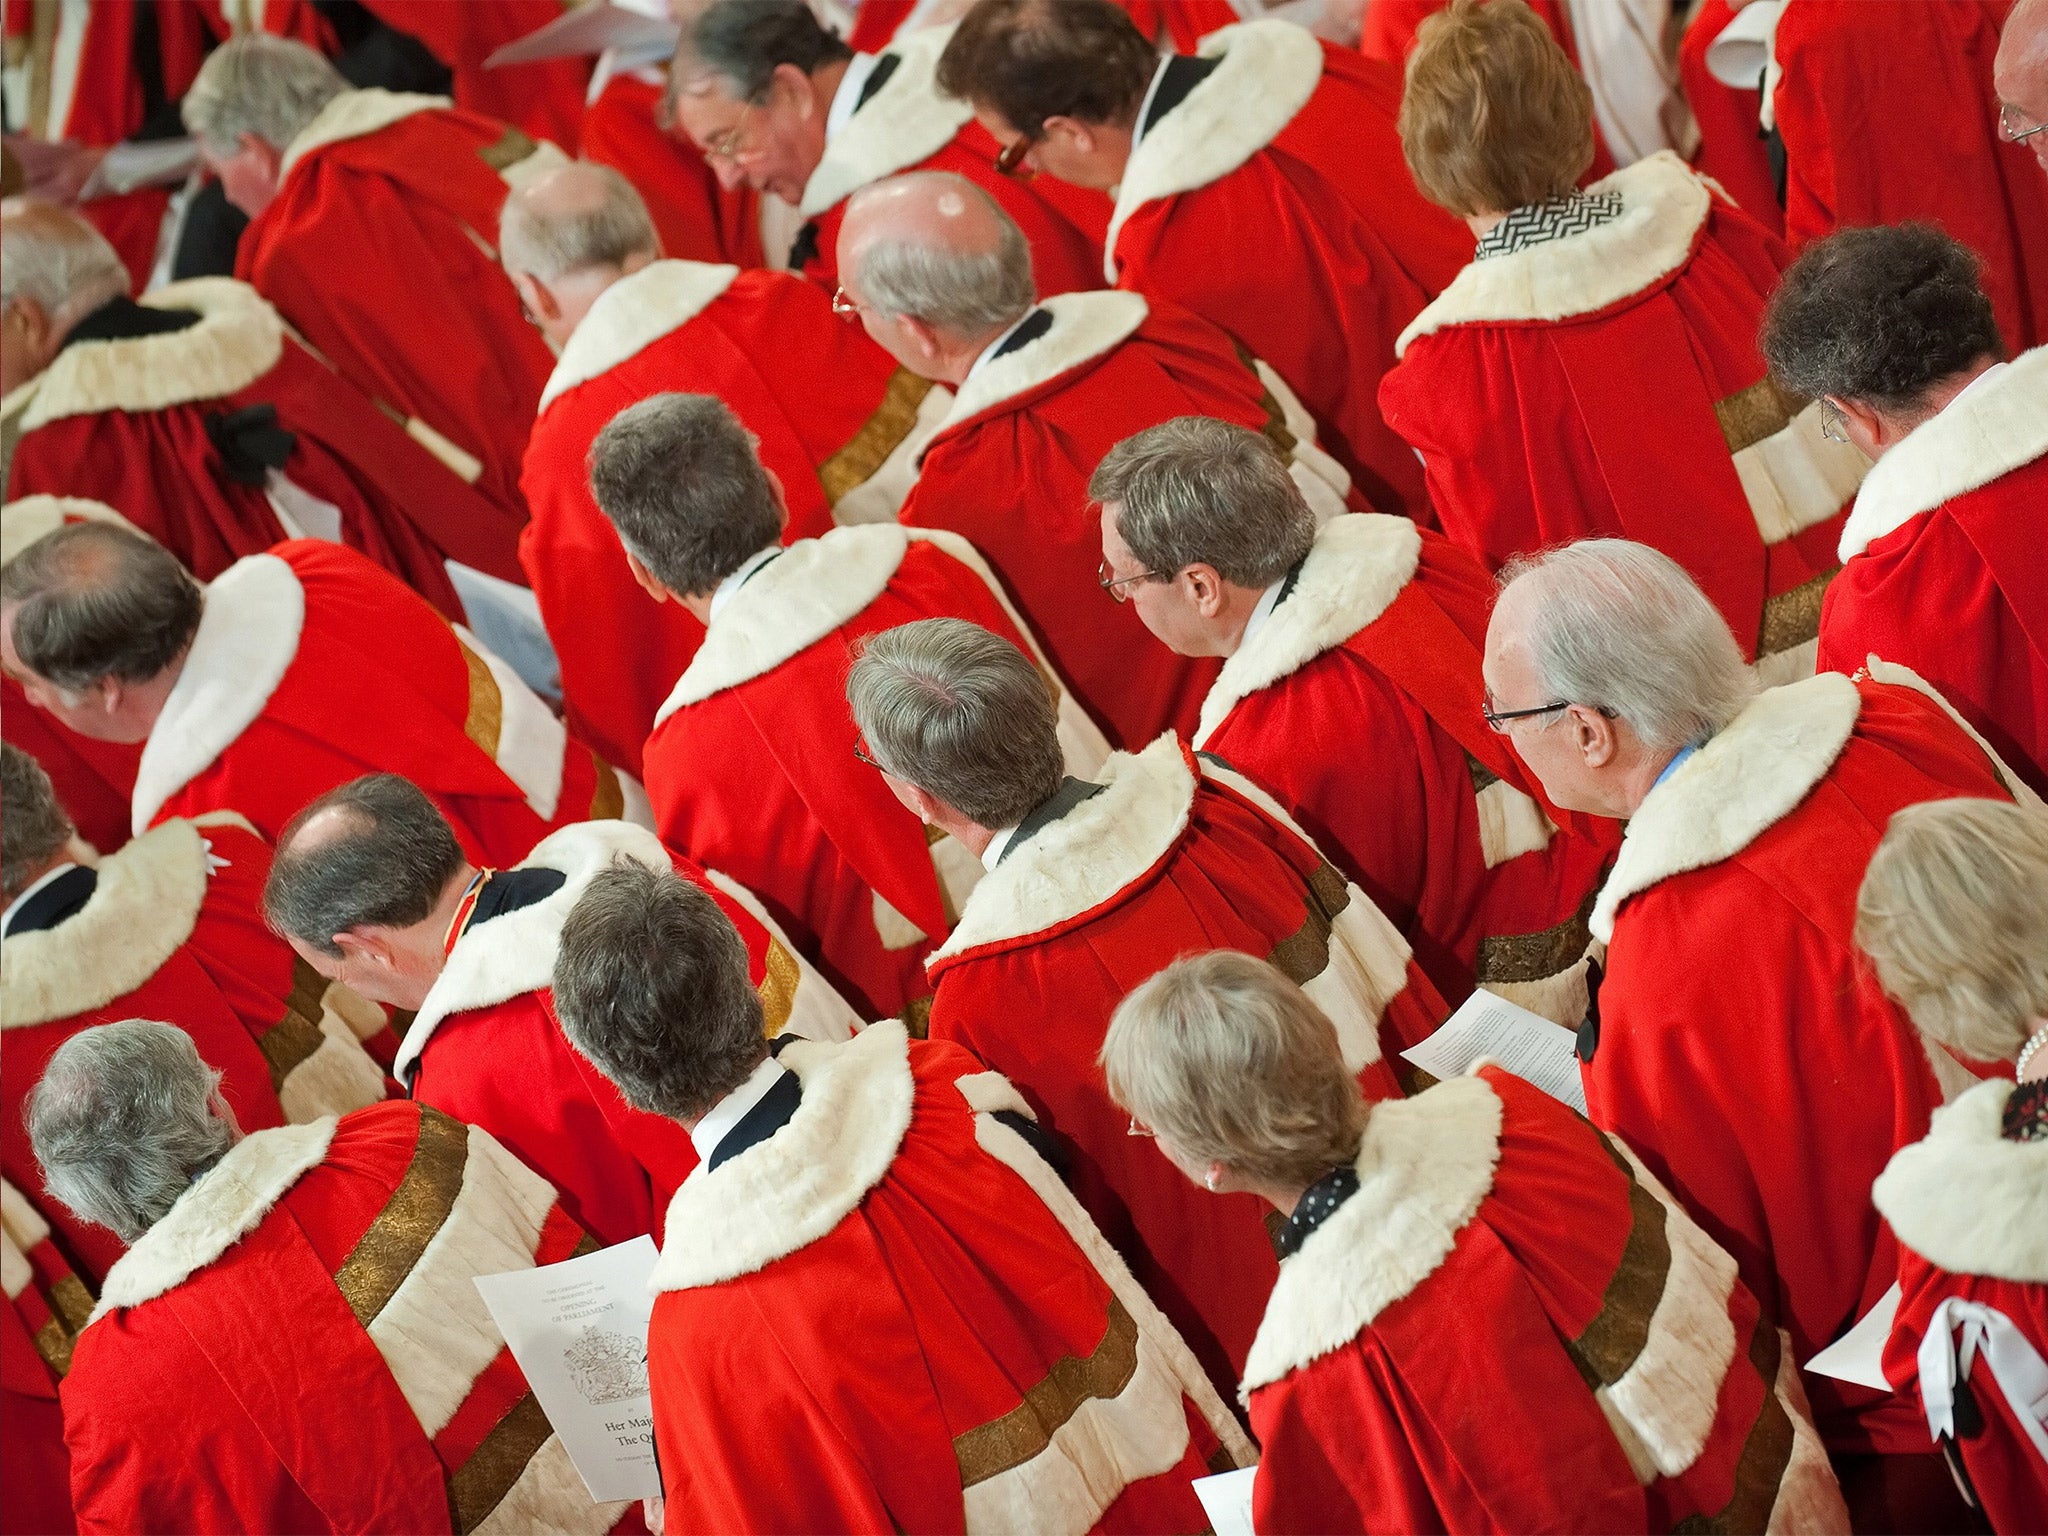 The justification for the review hinges on the claim that the Lords breached convention